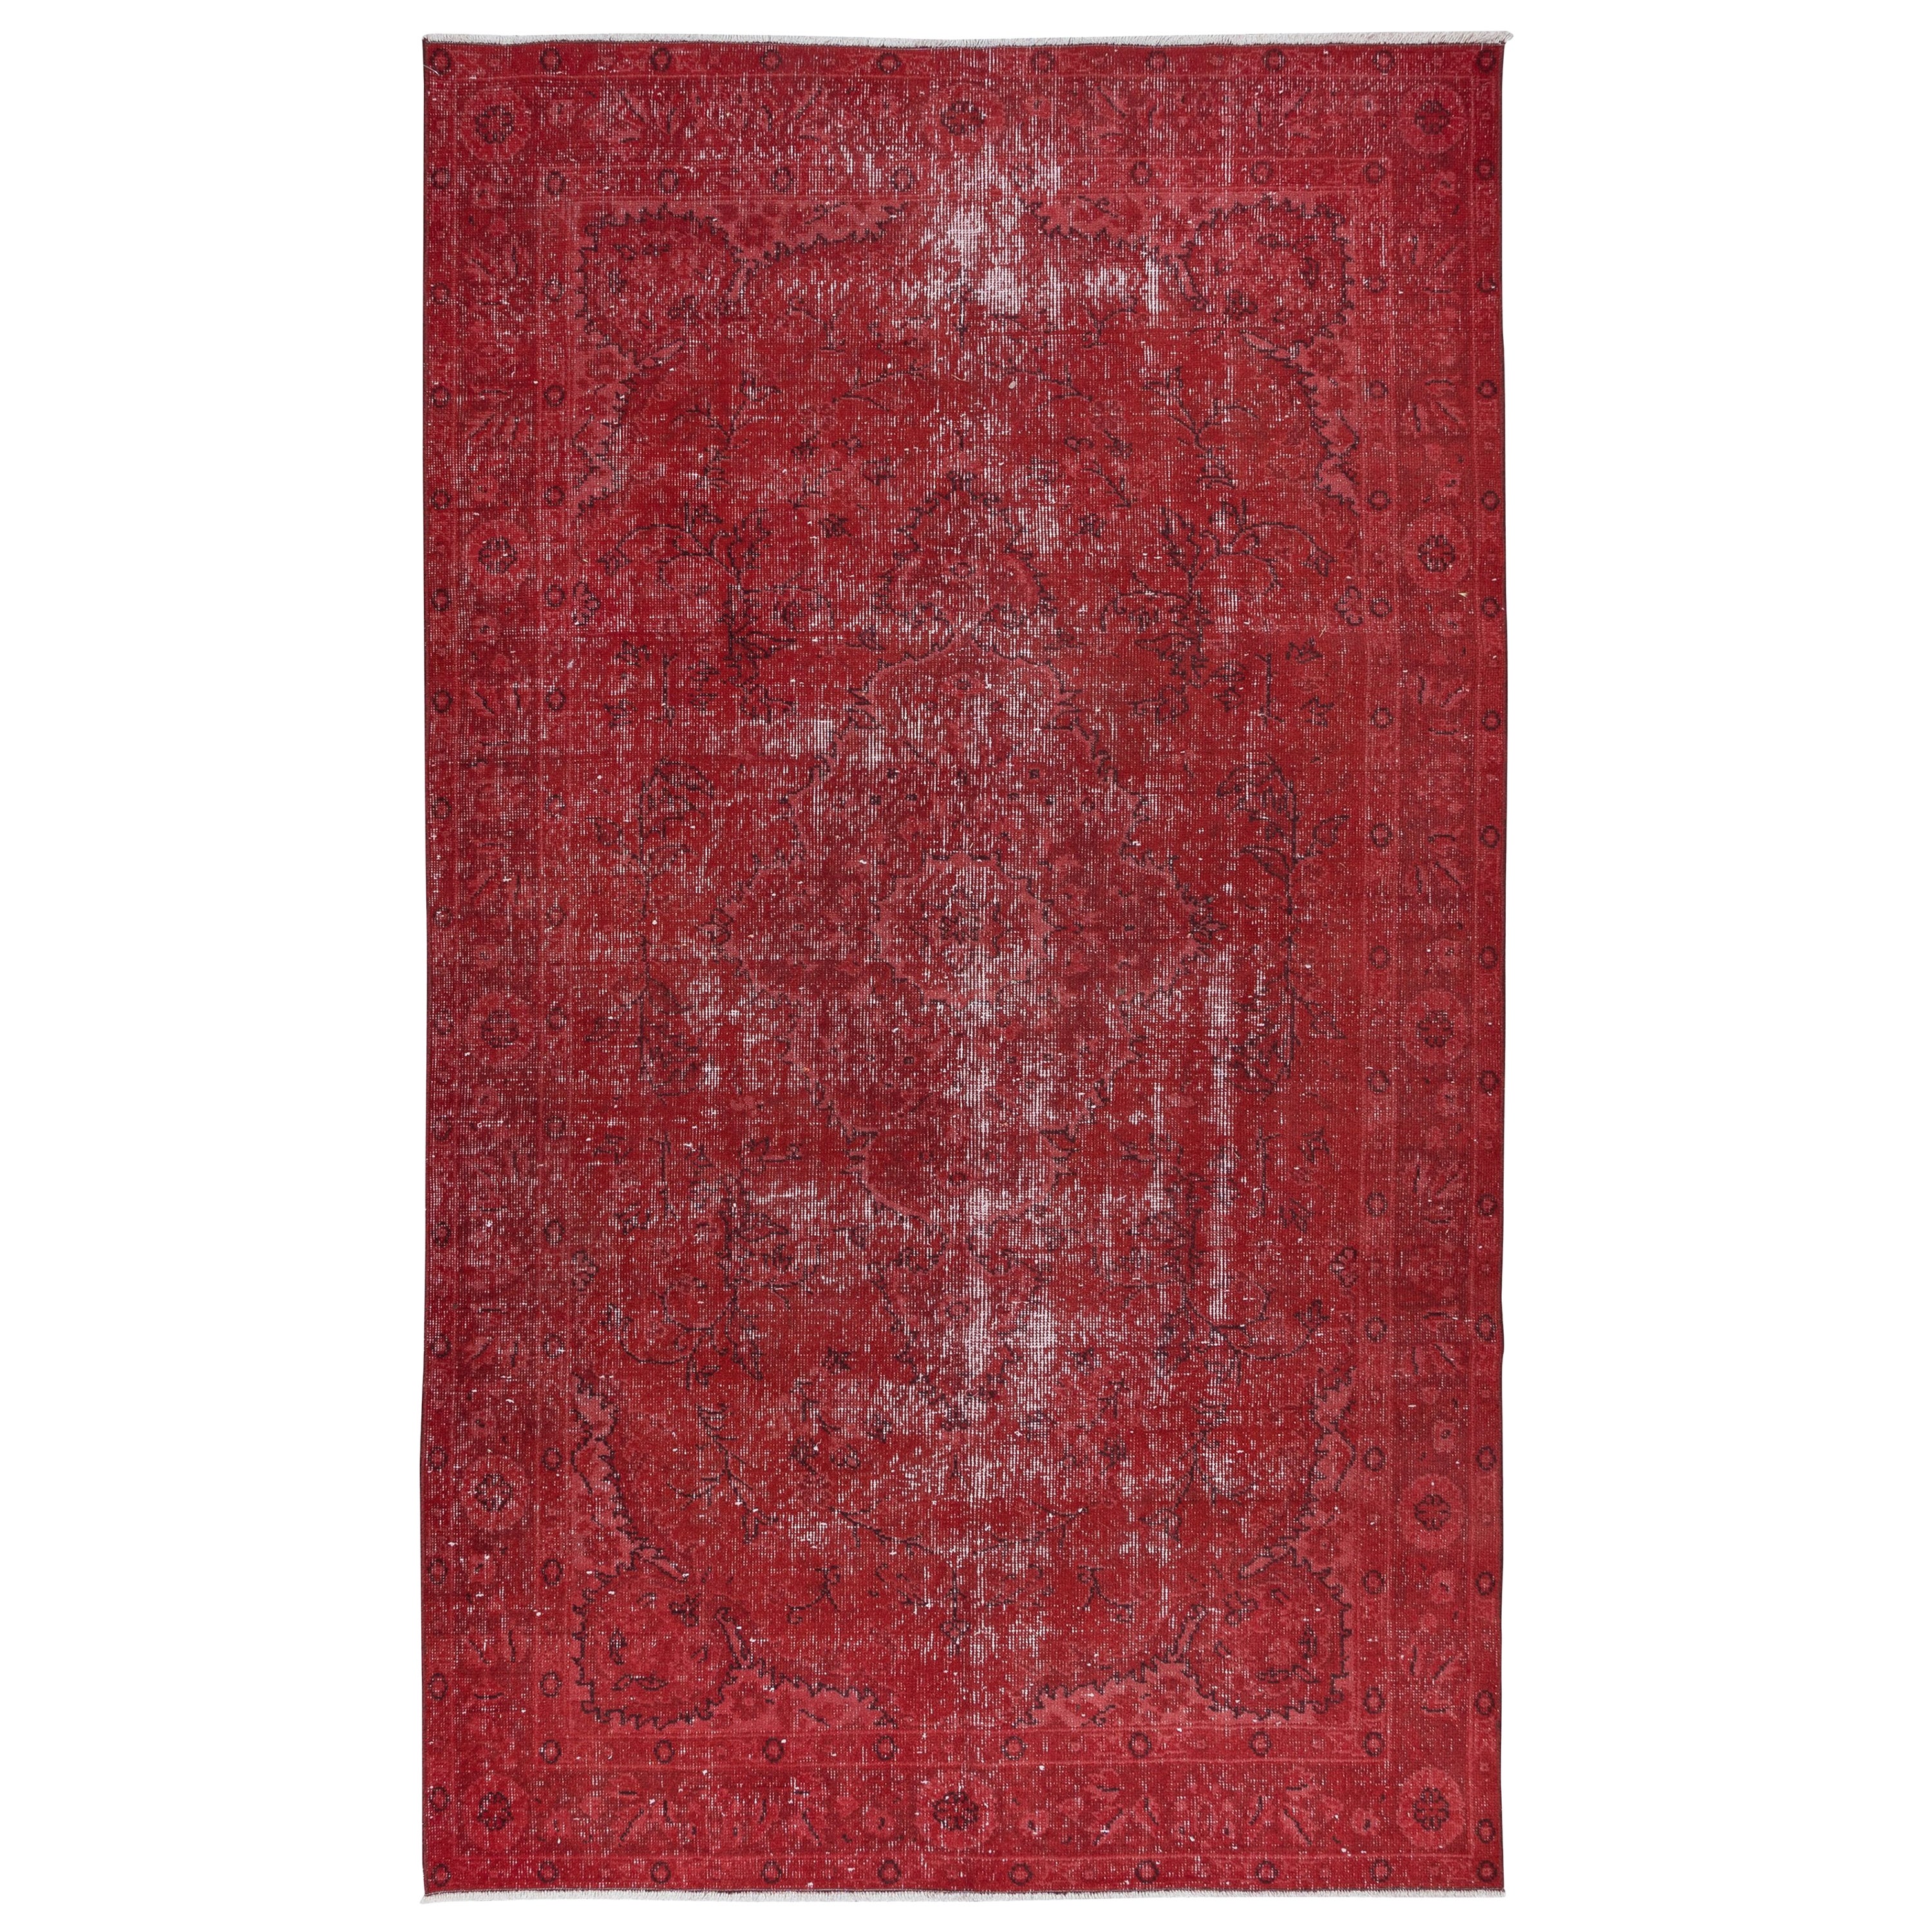 5.2x8.8 Ft Red Turkish Rug, Handmade Bohemian & Eclectic Carpet For Sale